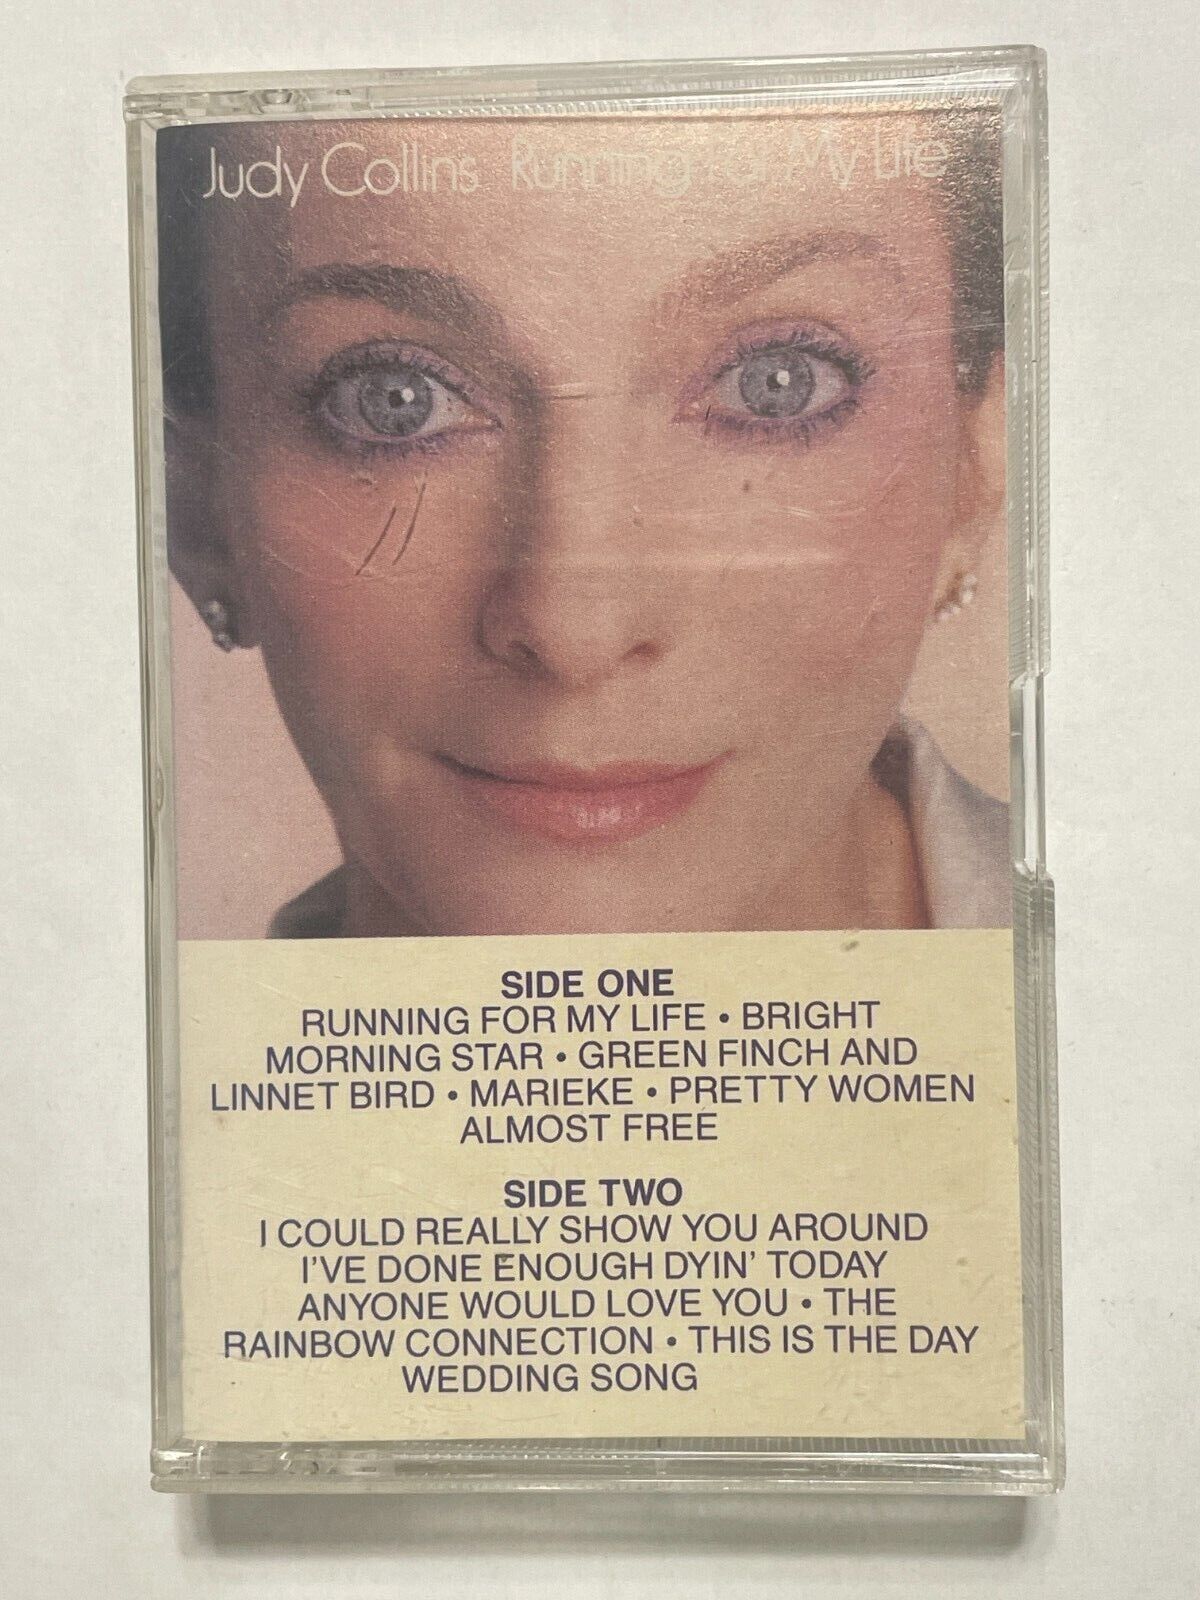 Language:JUDY COLLINS RUNNING FOR MY LIFE:$2.50 BARGAIN BIN ROCK/POP BUY 10 GET FREE SHIPPING BUILD A CASSETTE TAPE LOT B